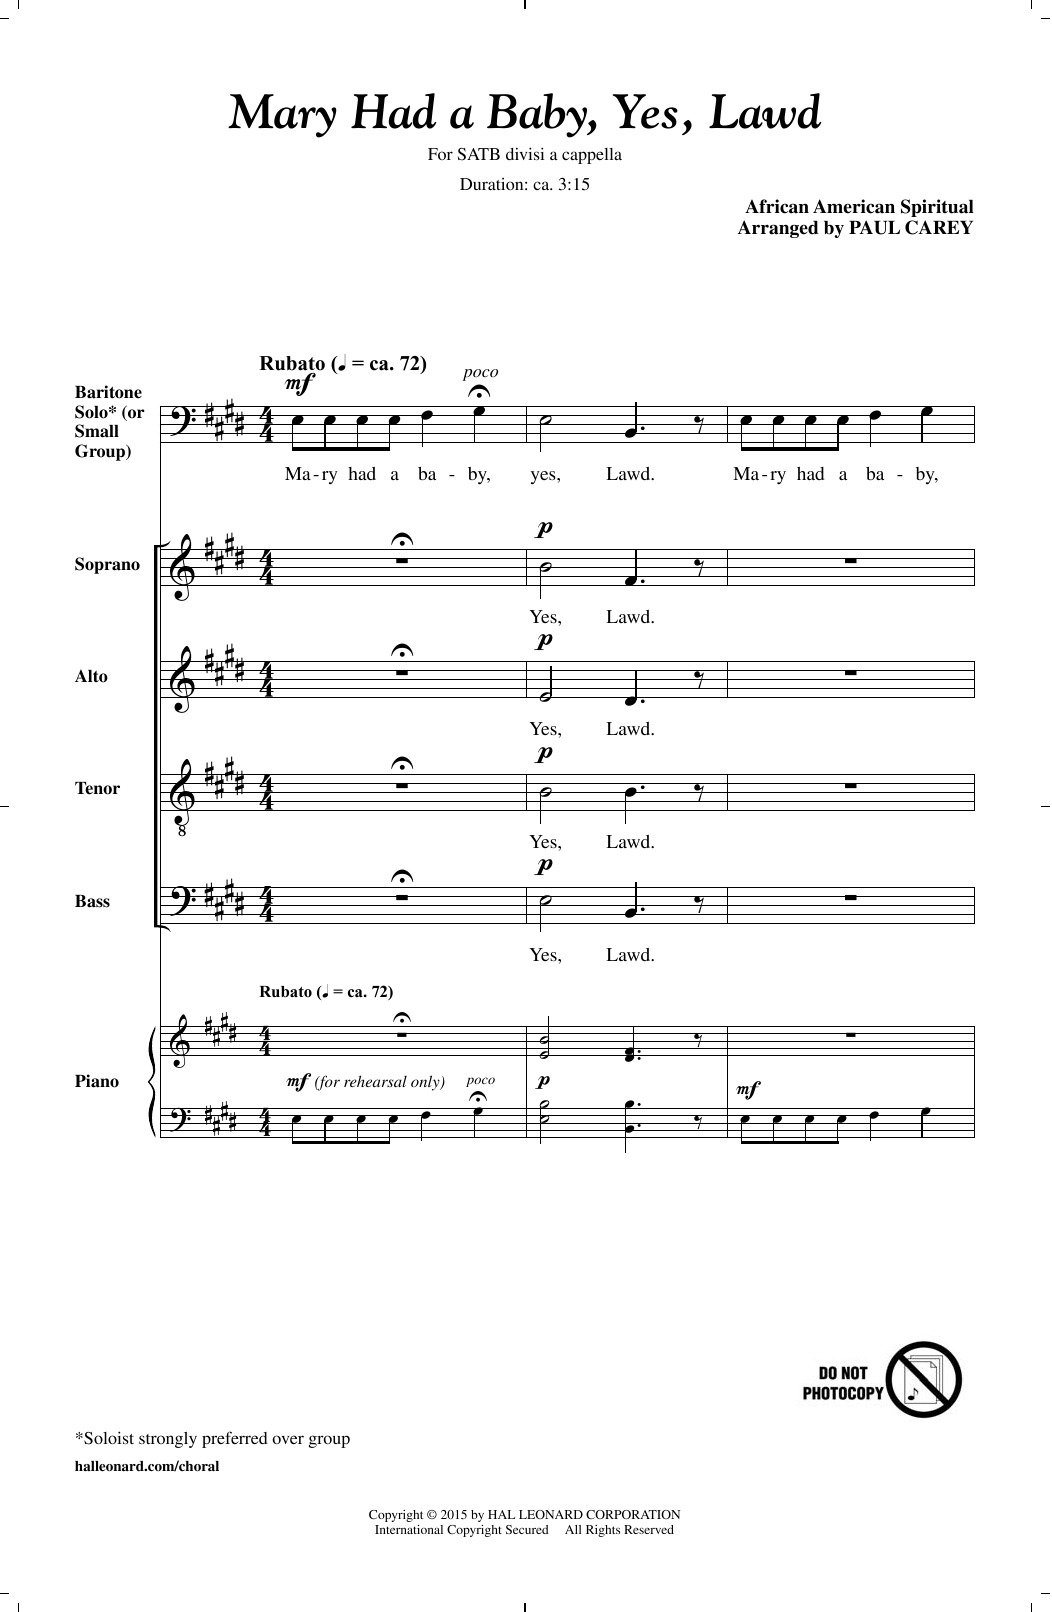 Download African-American Spiritual Mary Had A Baby, Yes, Lawd (arr. Paul C Sheet Music